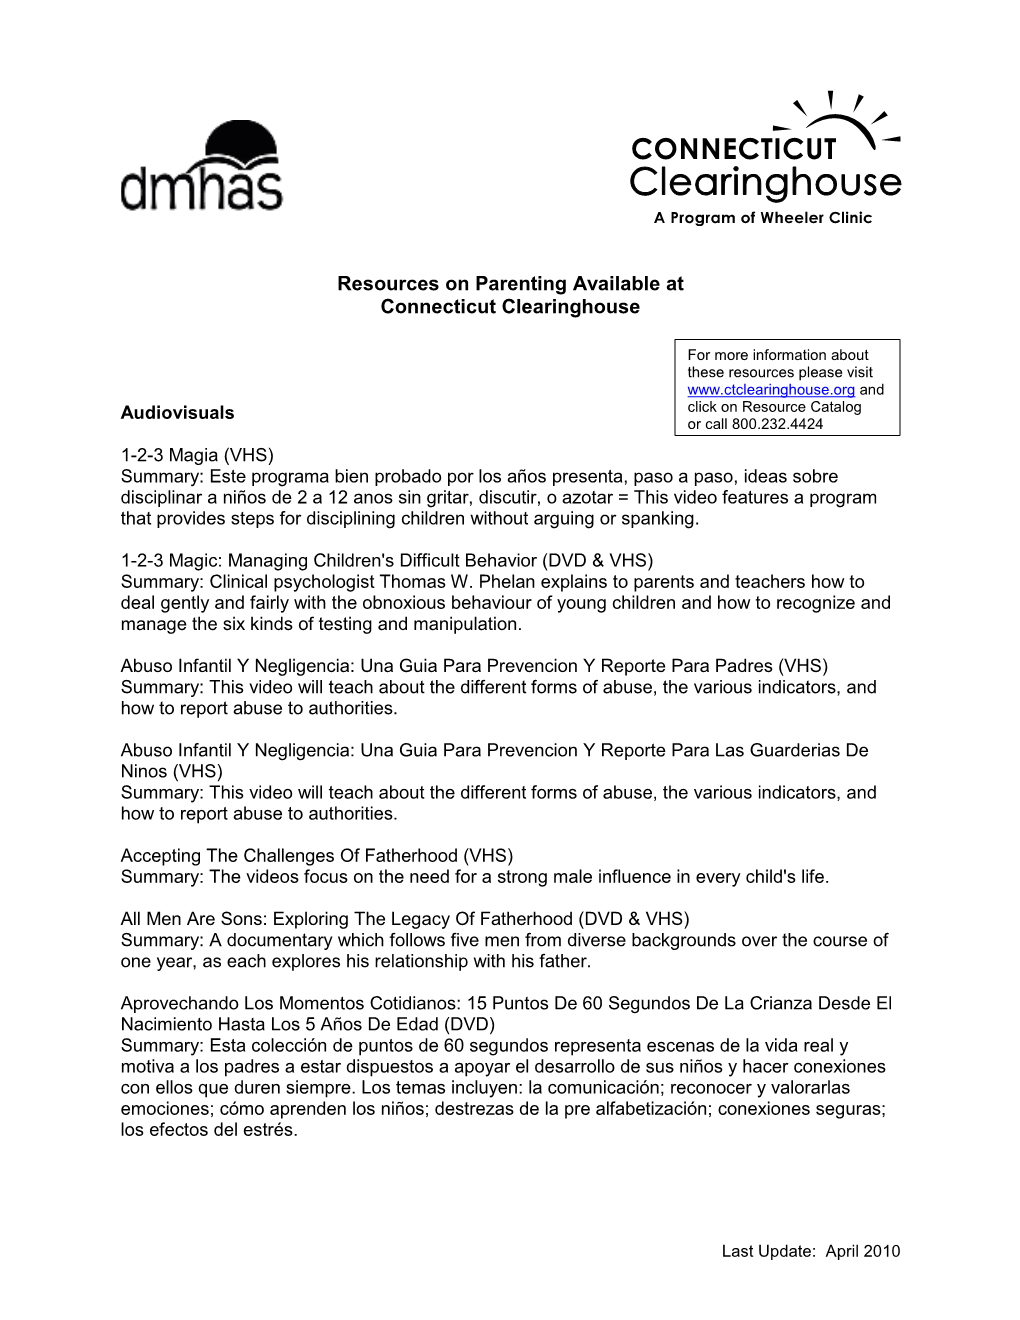 Resources on Parenting Available at Connecticut Clearinghouse